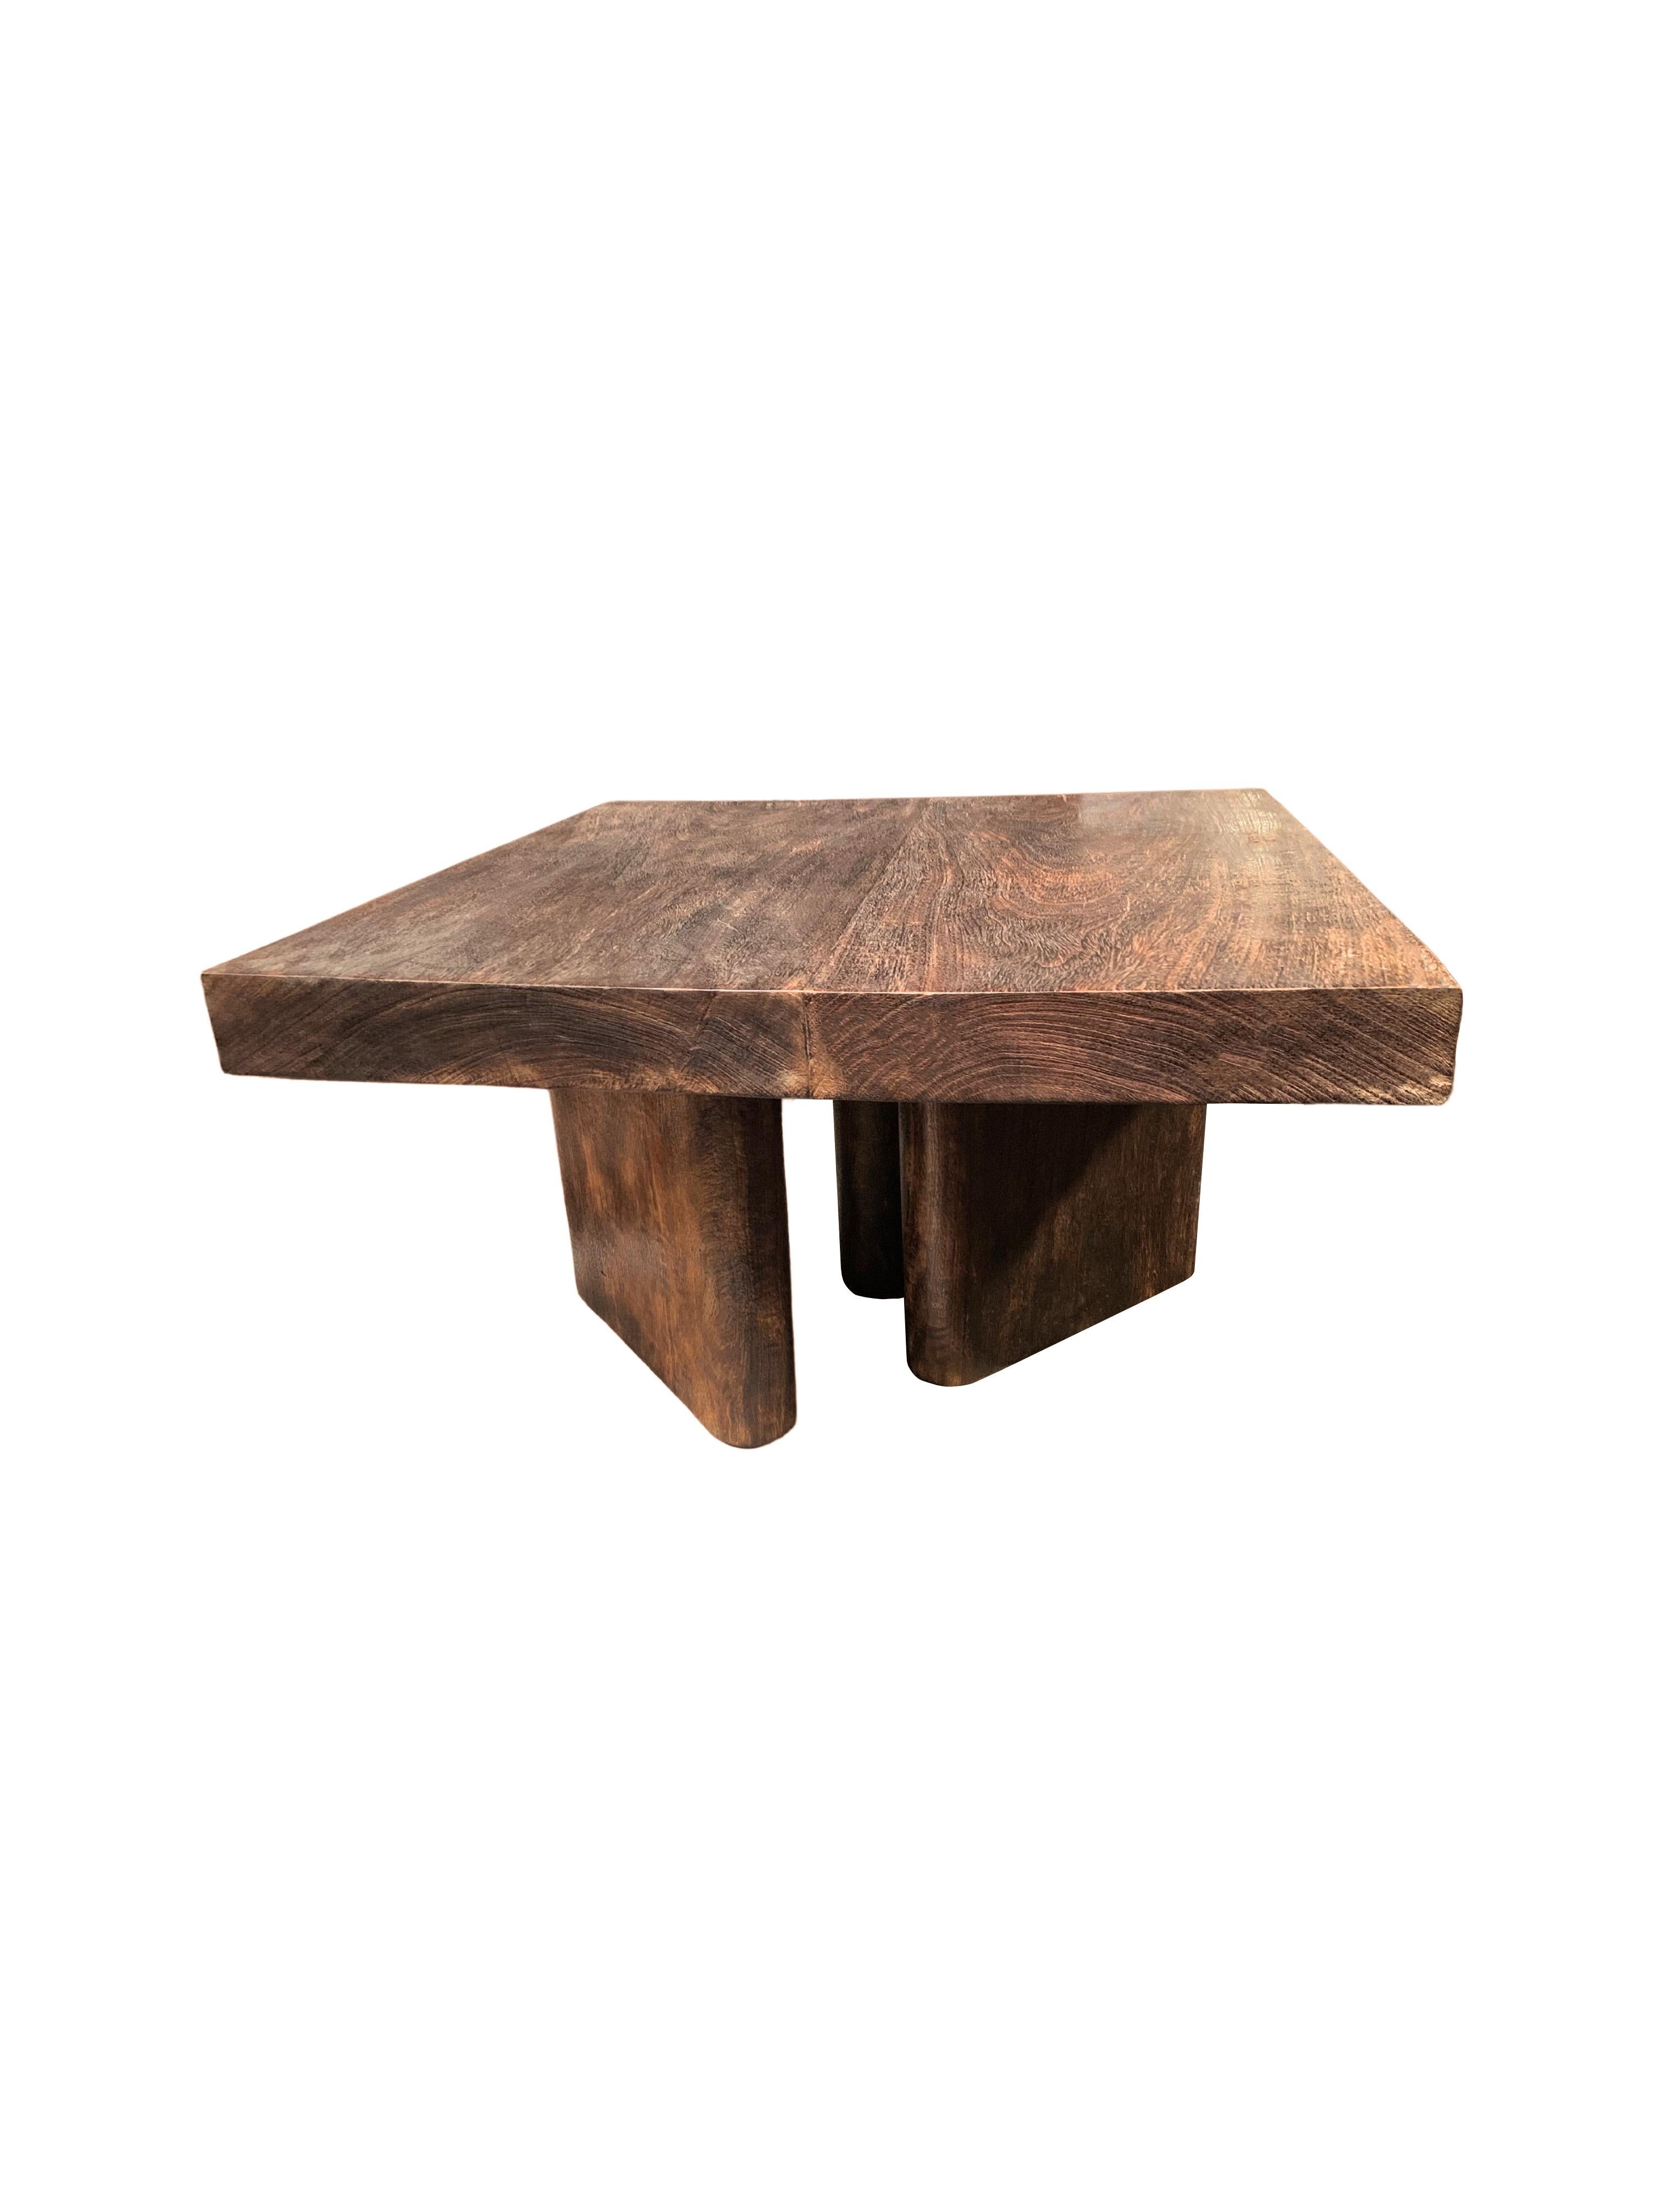 A sculptural mango wood bench with an espresso pigment. The mix of curved and straight lines and subtle wood texture make for a very elegant table. Unique to this bench are the 3 angular legs it sits on. These legs feature curved edges to provide